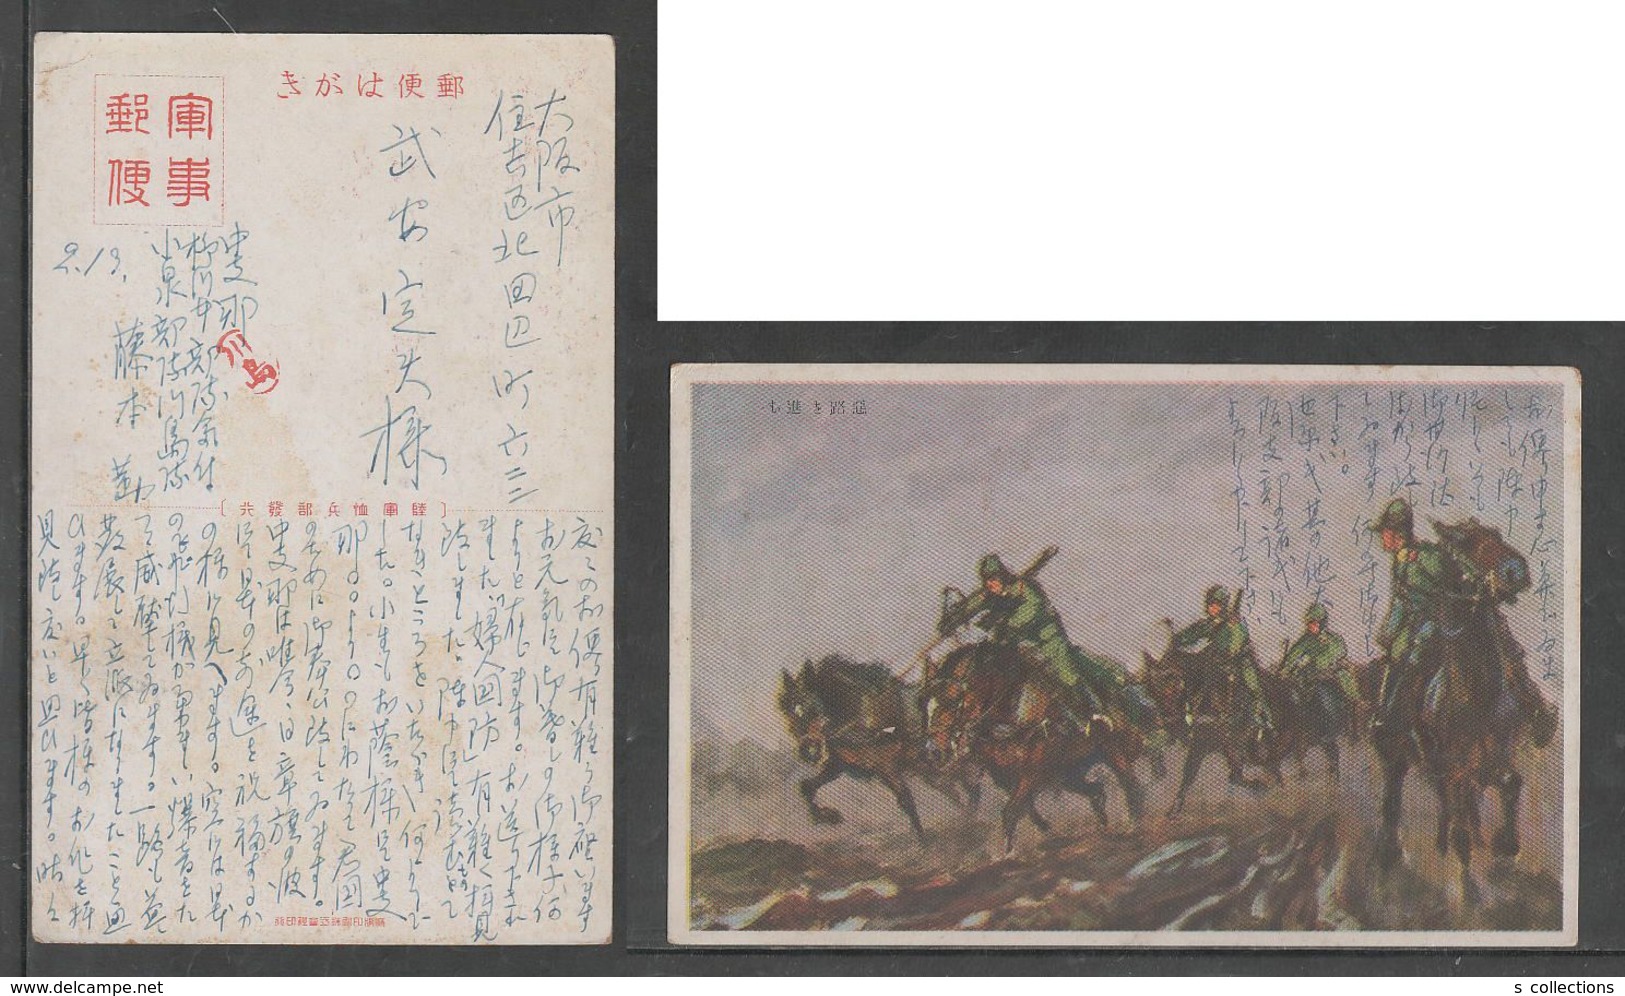 JAPAN WWII Military Japanese Soldier Horse Picture Postcard CENTRAL CHINA WW2 MANCHURIA CHINE JAPON GIAPPONE - 1943-45 Shanghai & Nanjing